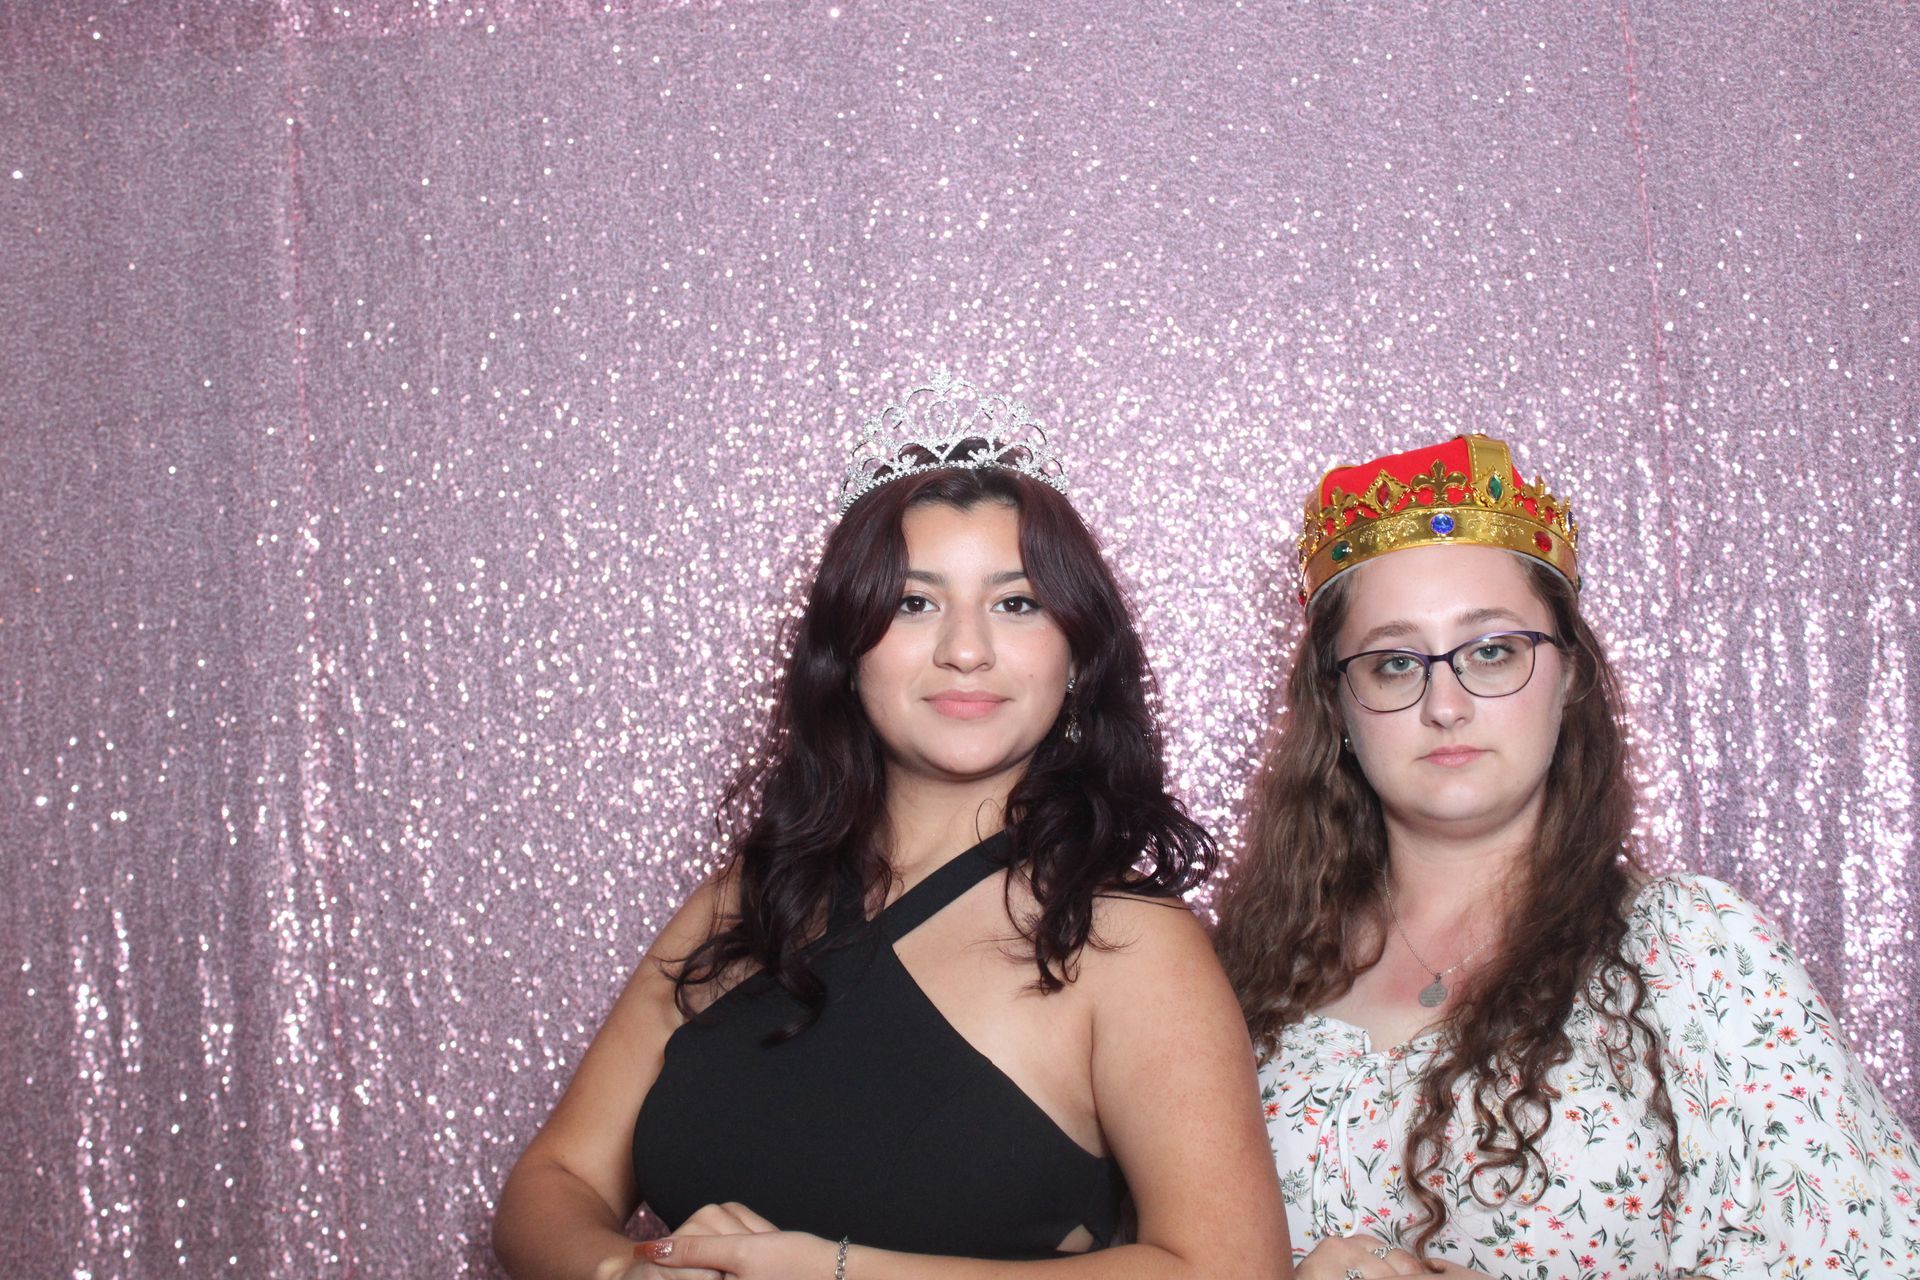 Two women at the Quinceañera event posing for a picture in the Cloee Photo Booth.